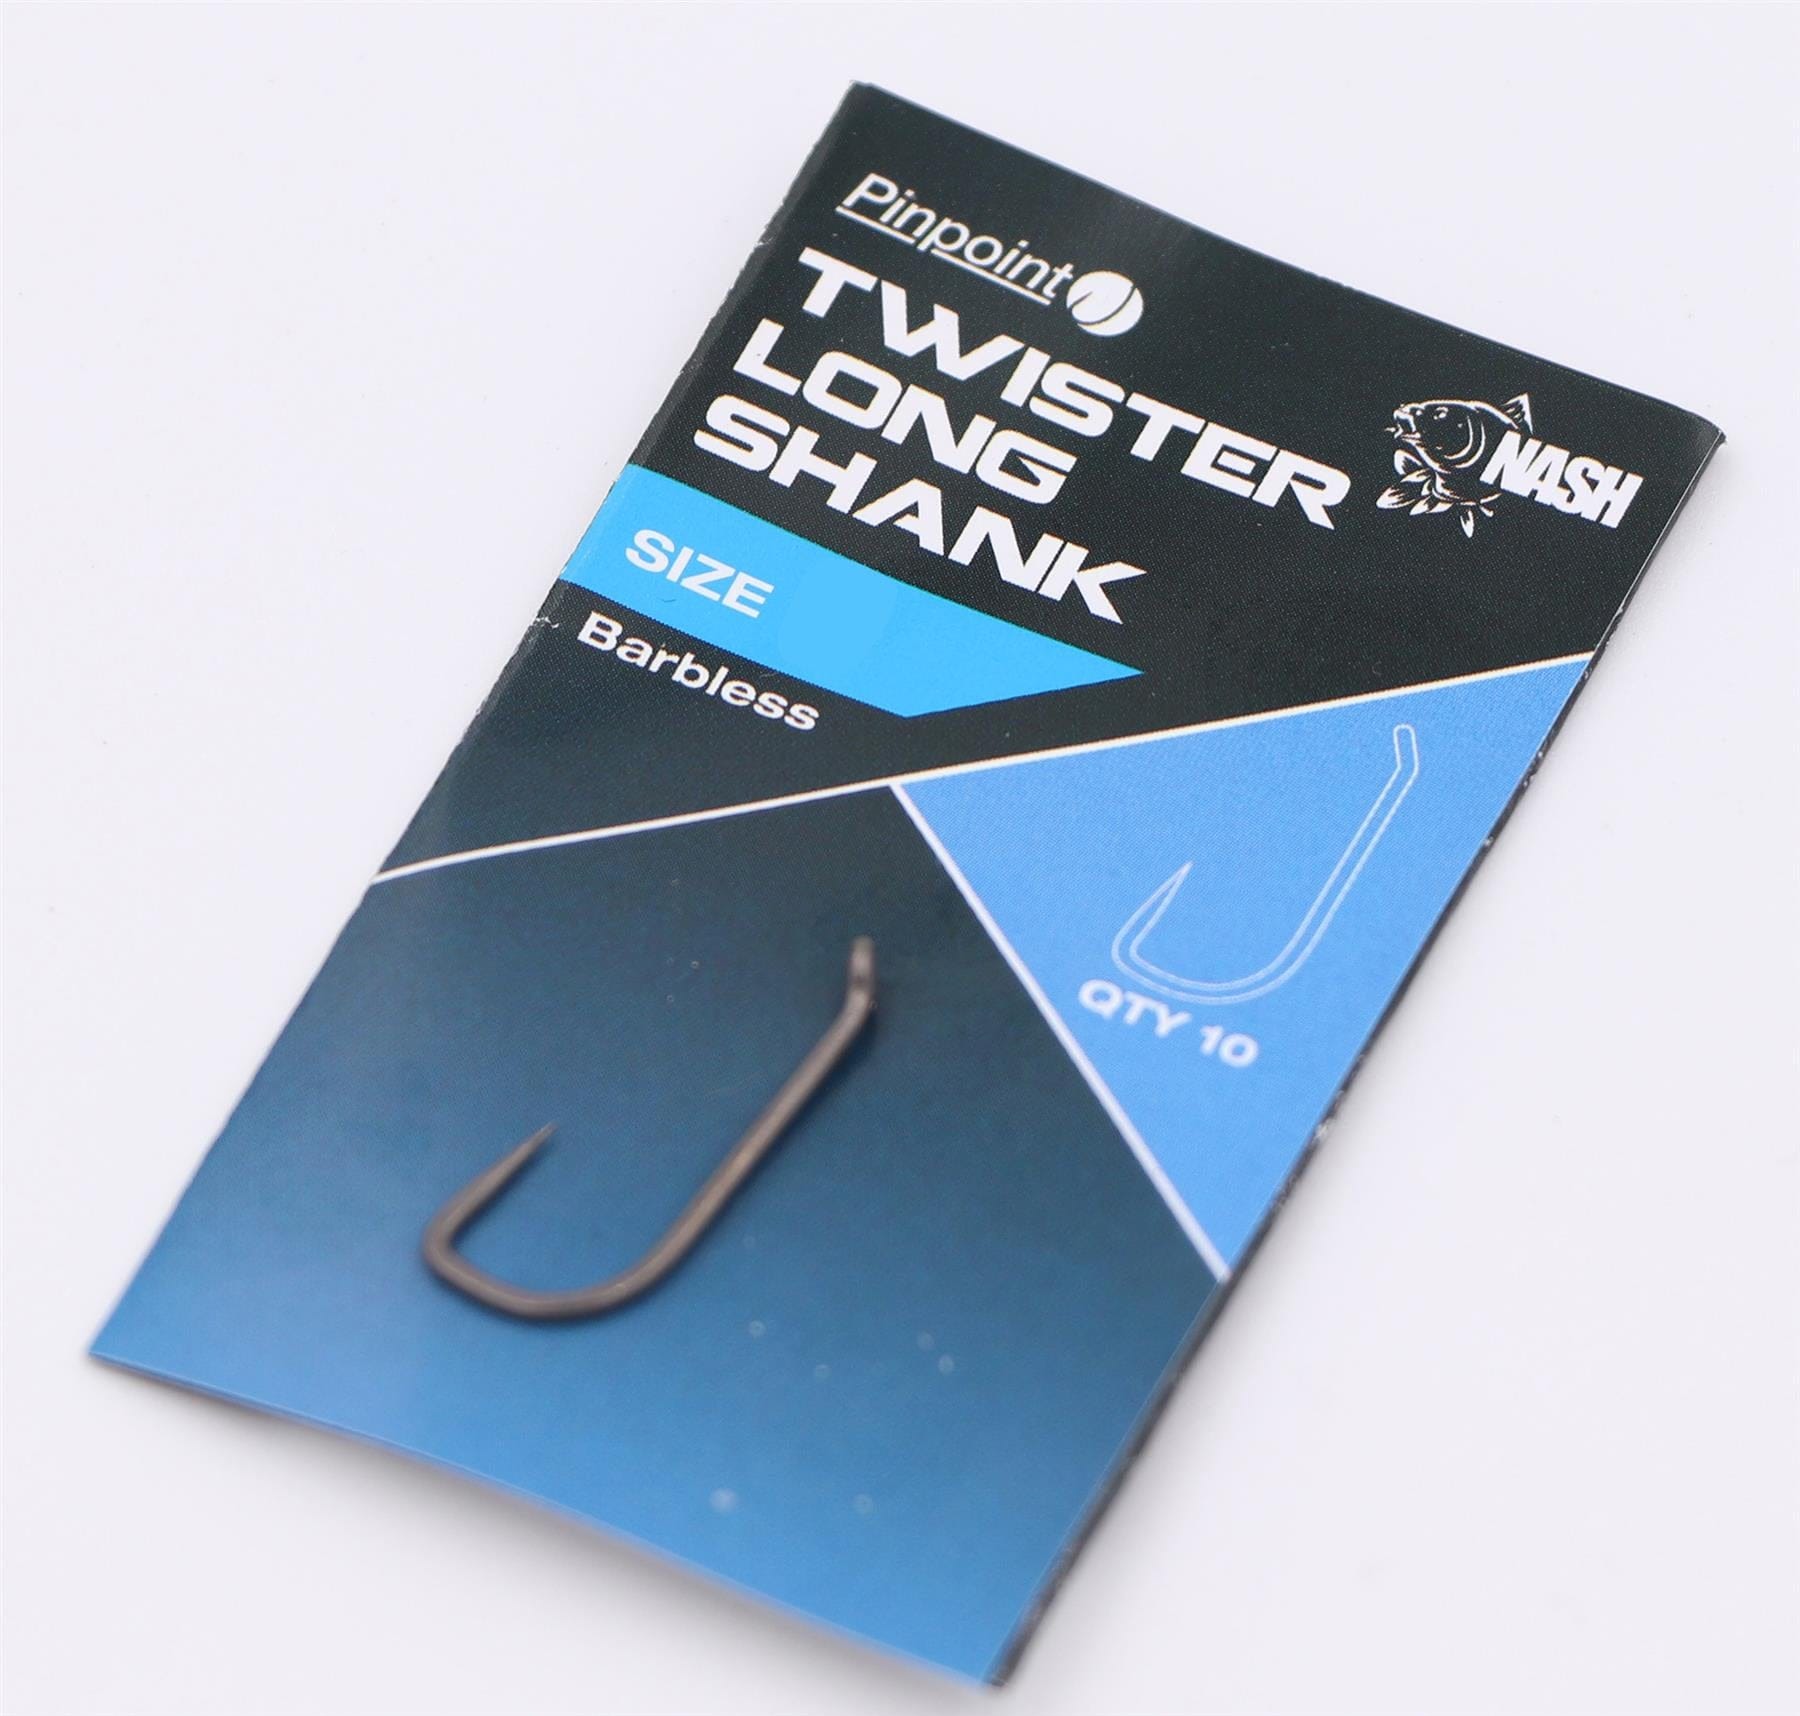 Nash Twister Hooks - Barbless - All Sizes - Carp Fishing Terminal Tackle  NEW